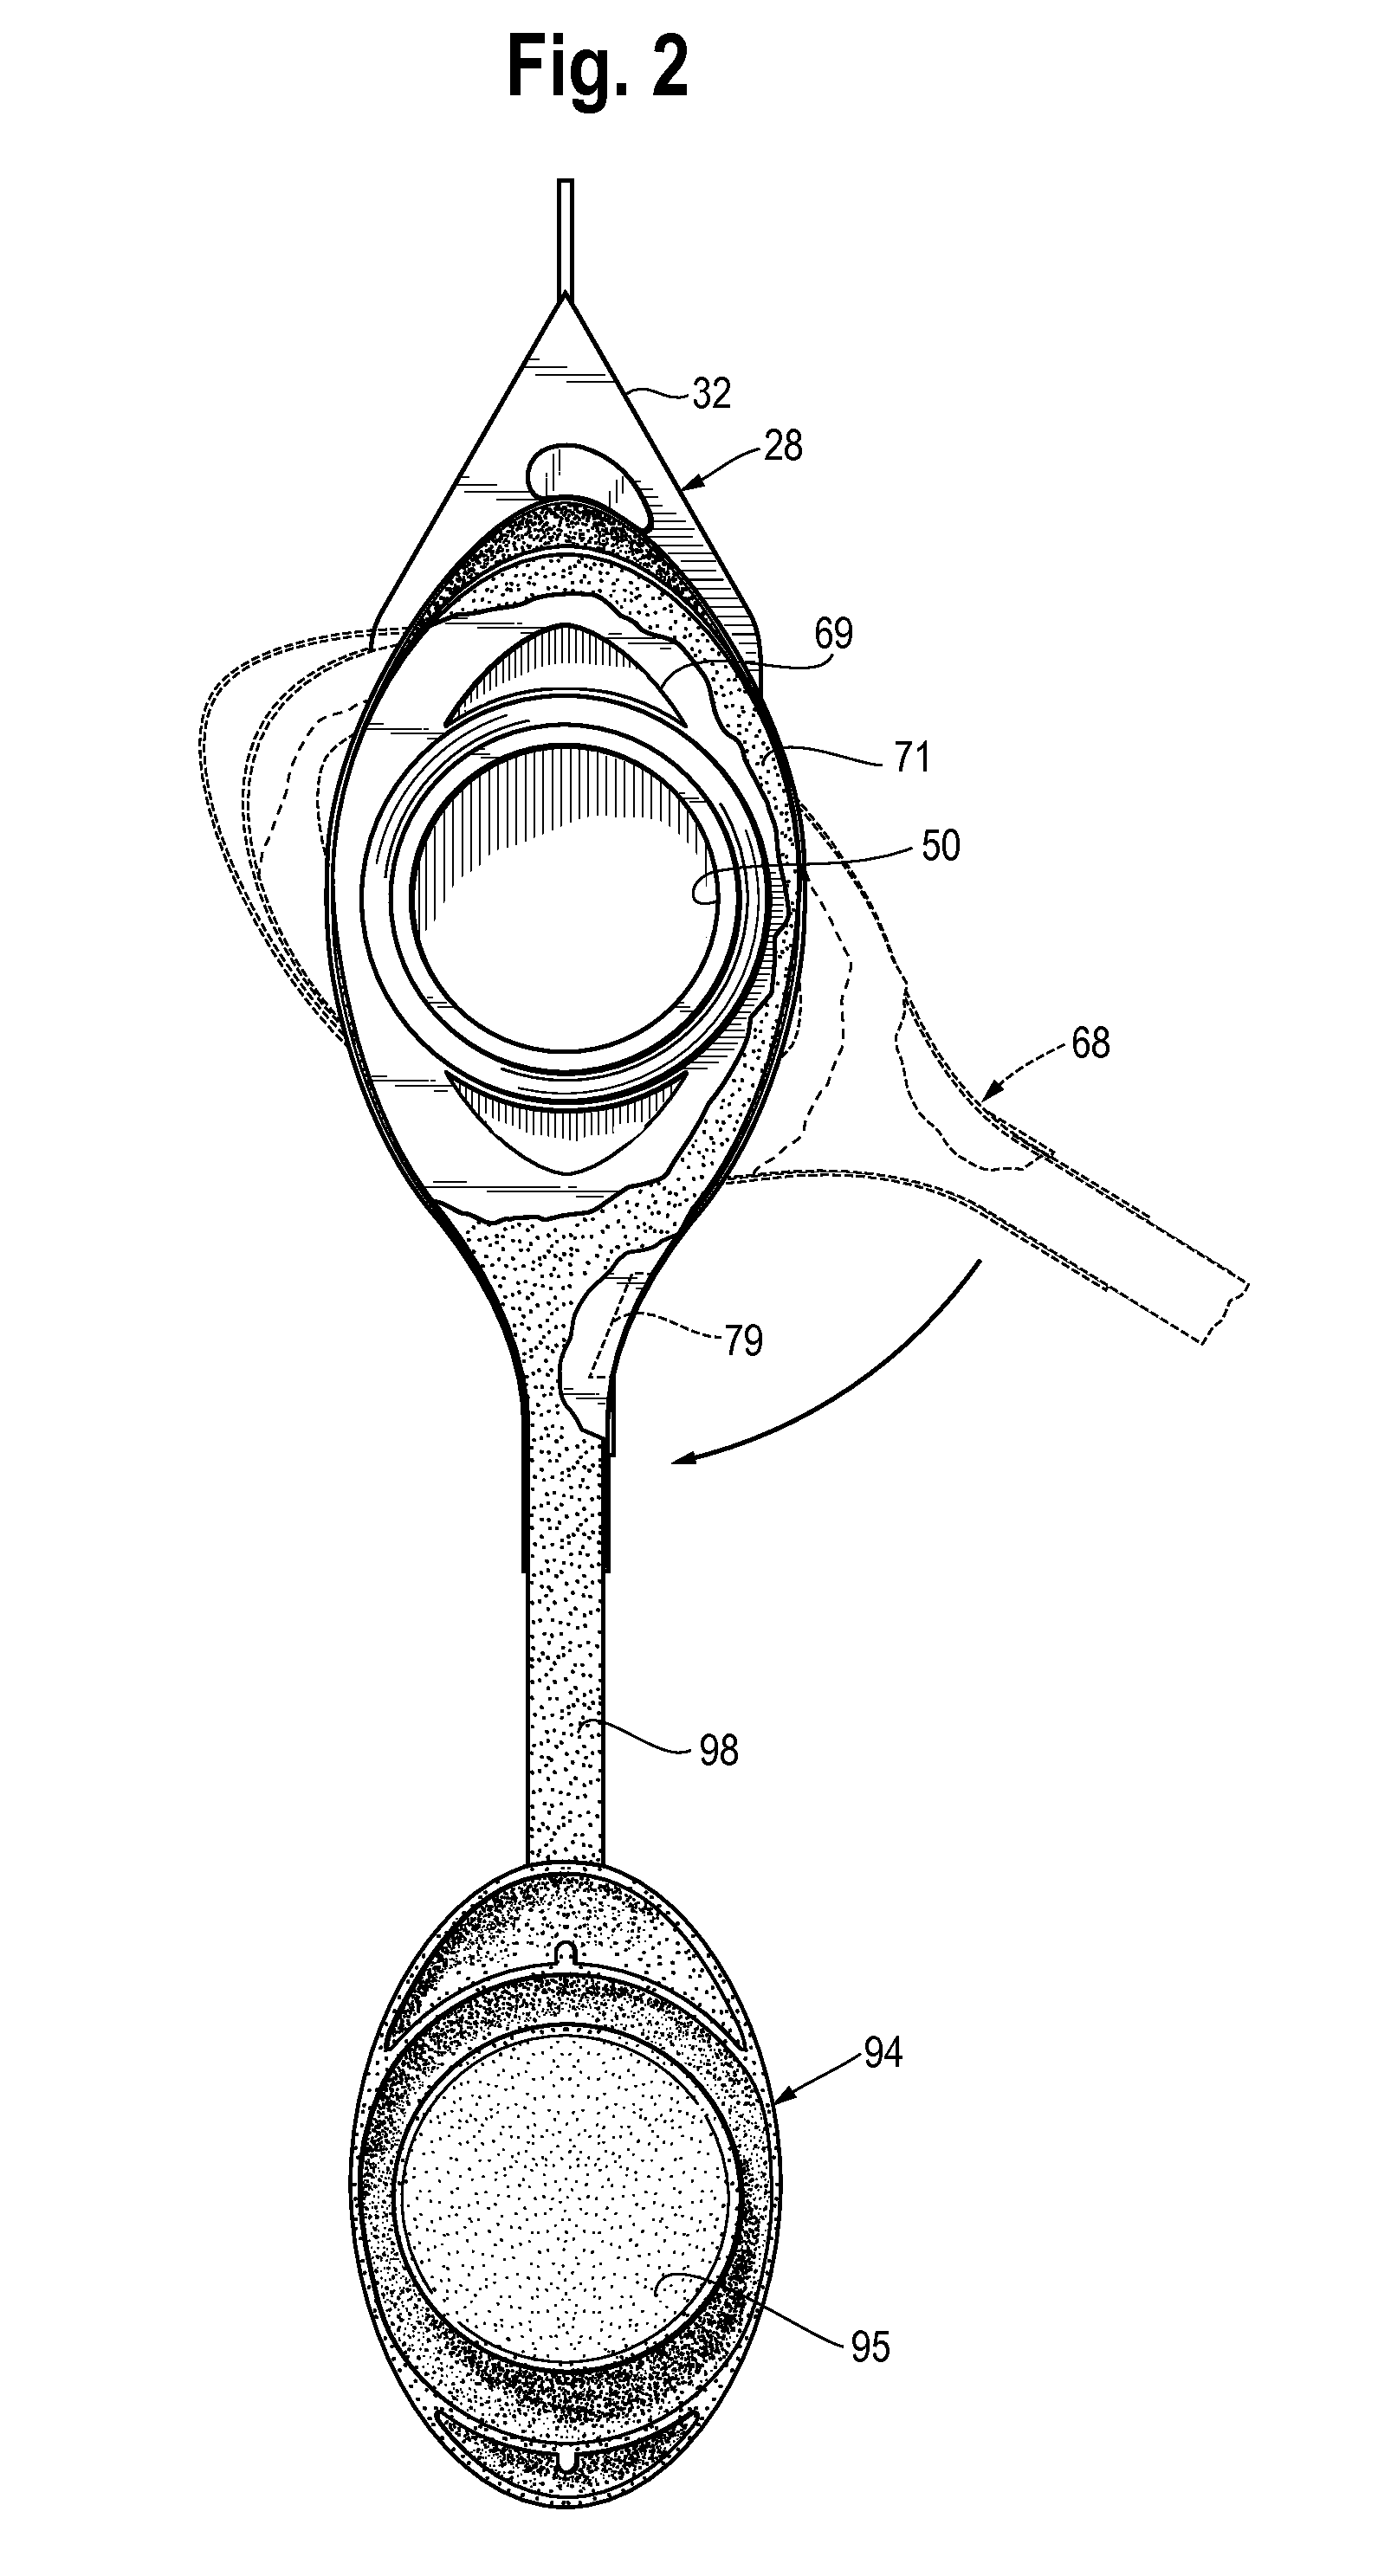 Valve for ostomy pouch